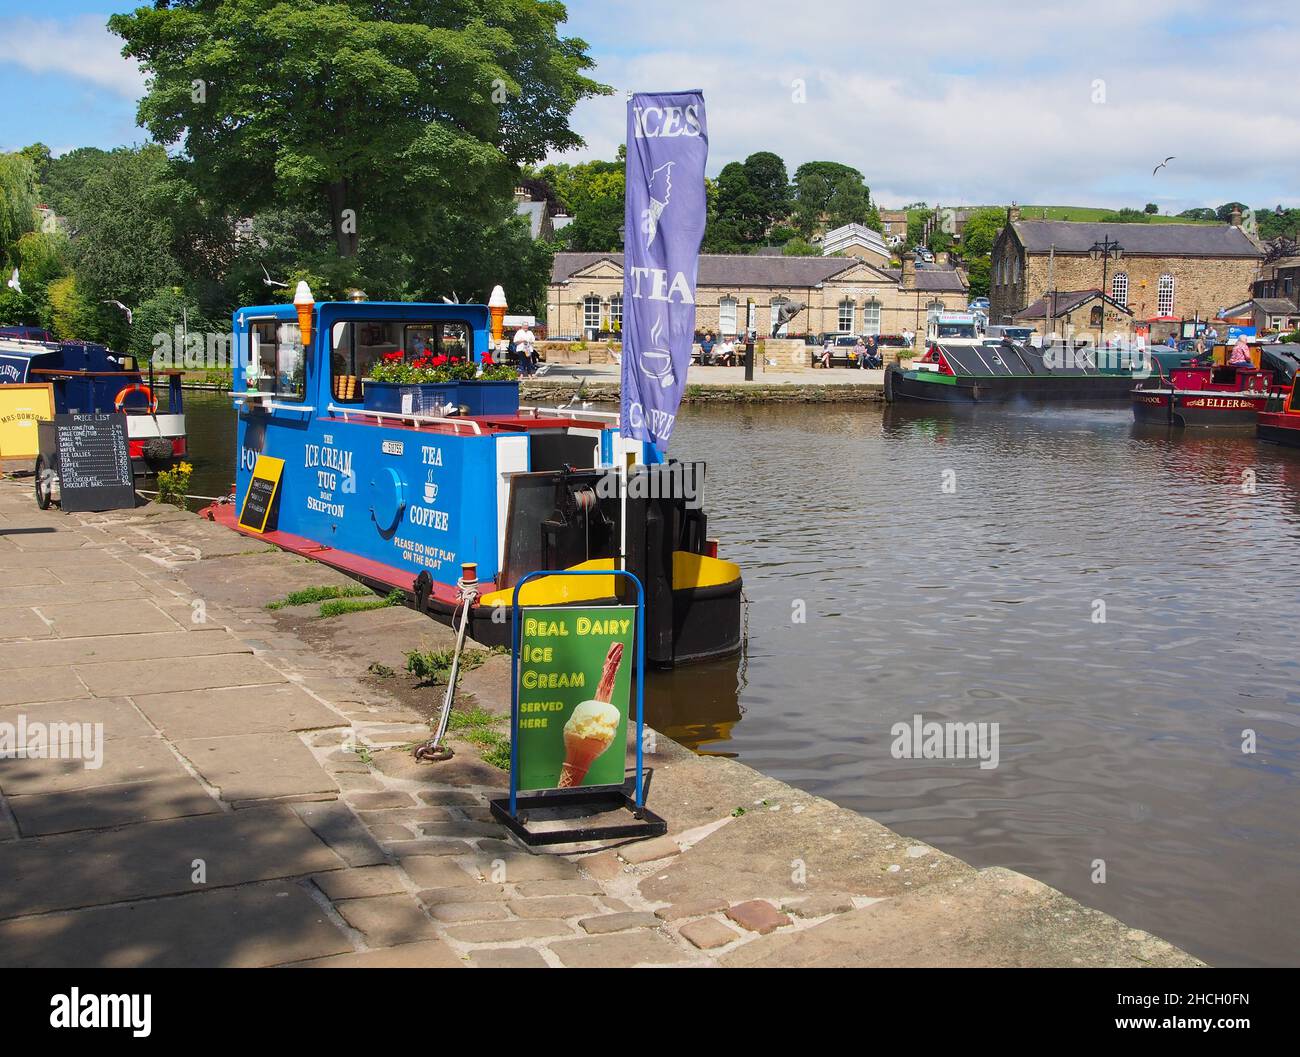 The ice cream boat moored in the sunshine at the canal basin on the Leeds and Liverpool canal in Skipton, North Yorkshire, England. Stock Photo